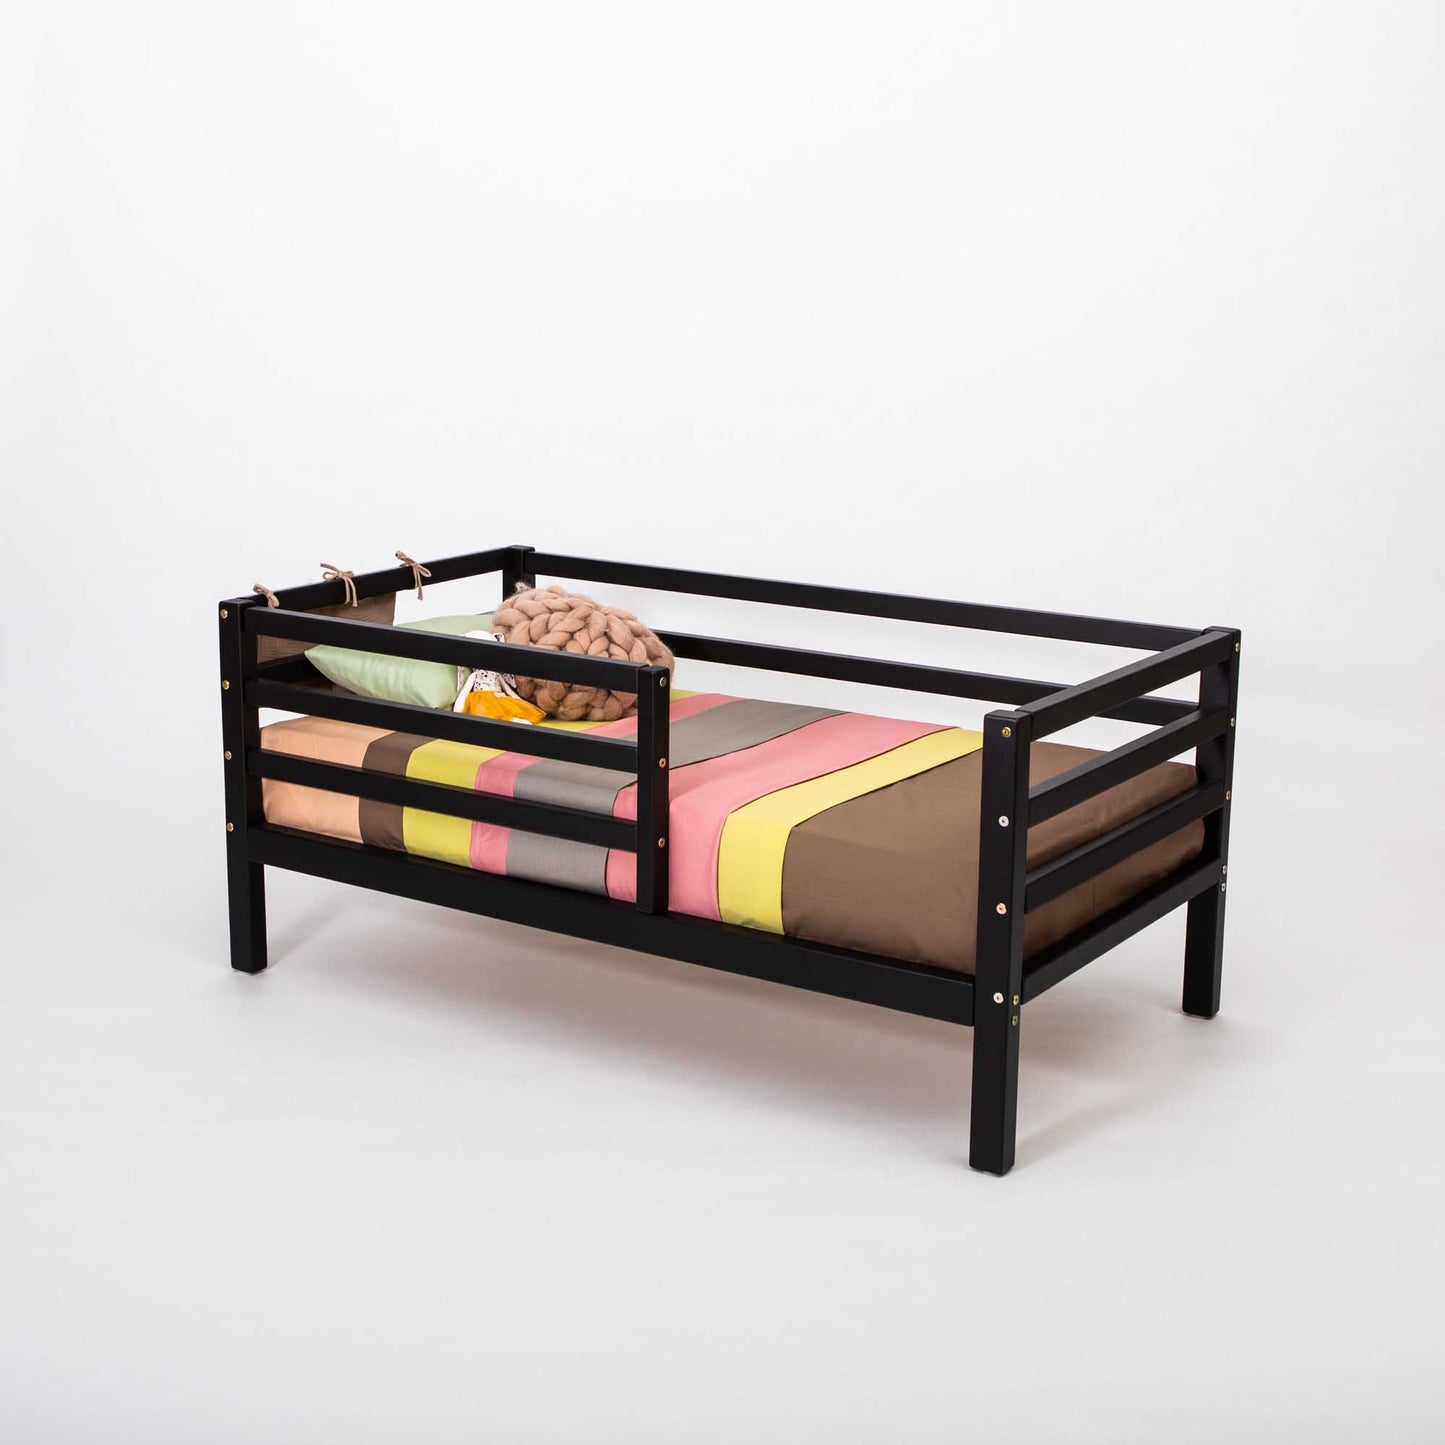 A 2-in-1 transformable kids' bed with a horizontal rail fence from Sweet Home From Wood.